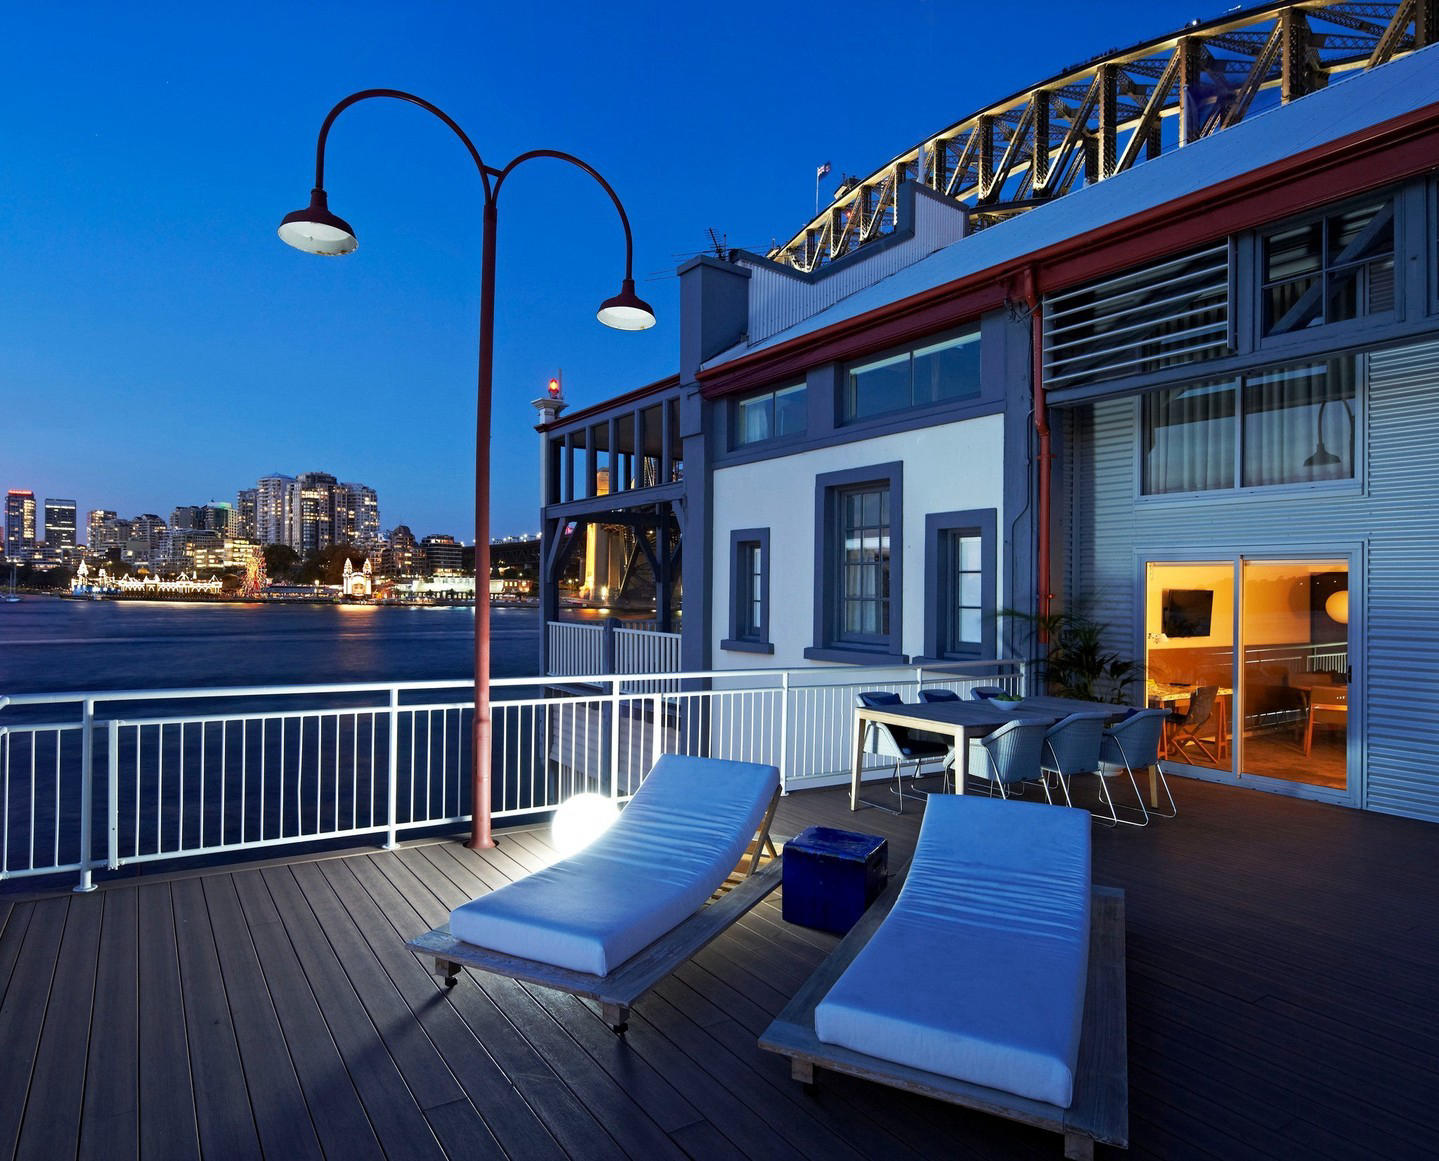 Pier One Sydney Harbour - Make the most of this NYE with a private celebration in one of our incredi